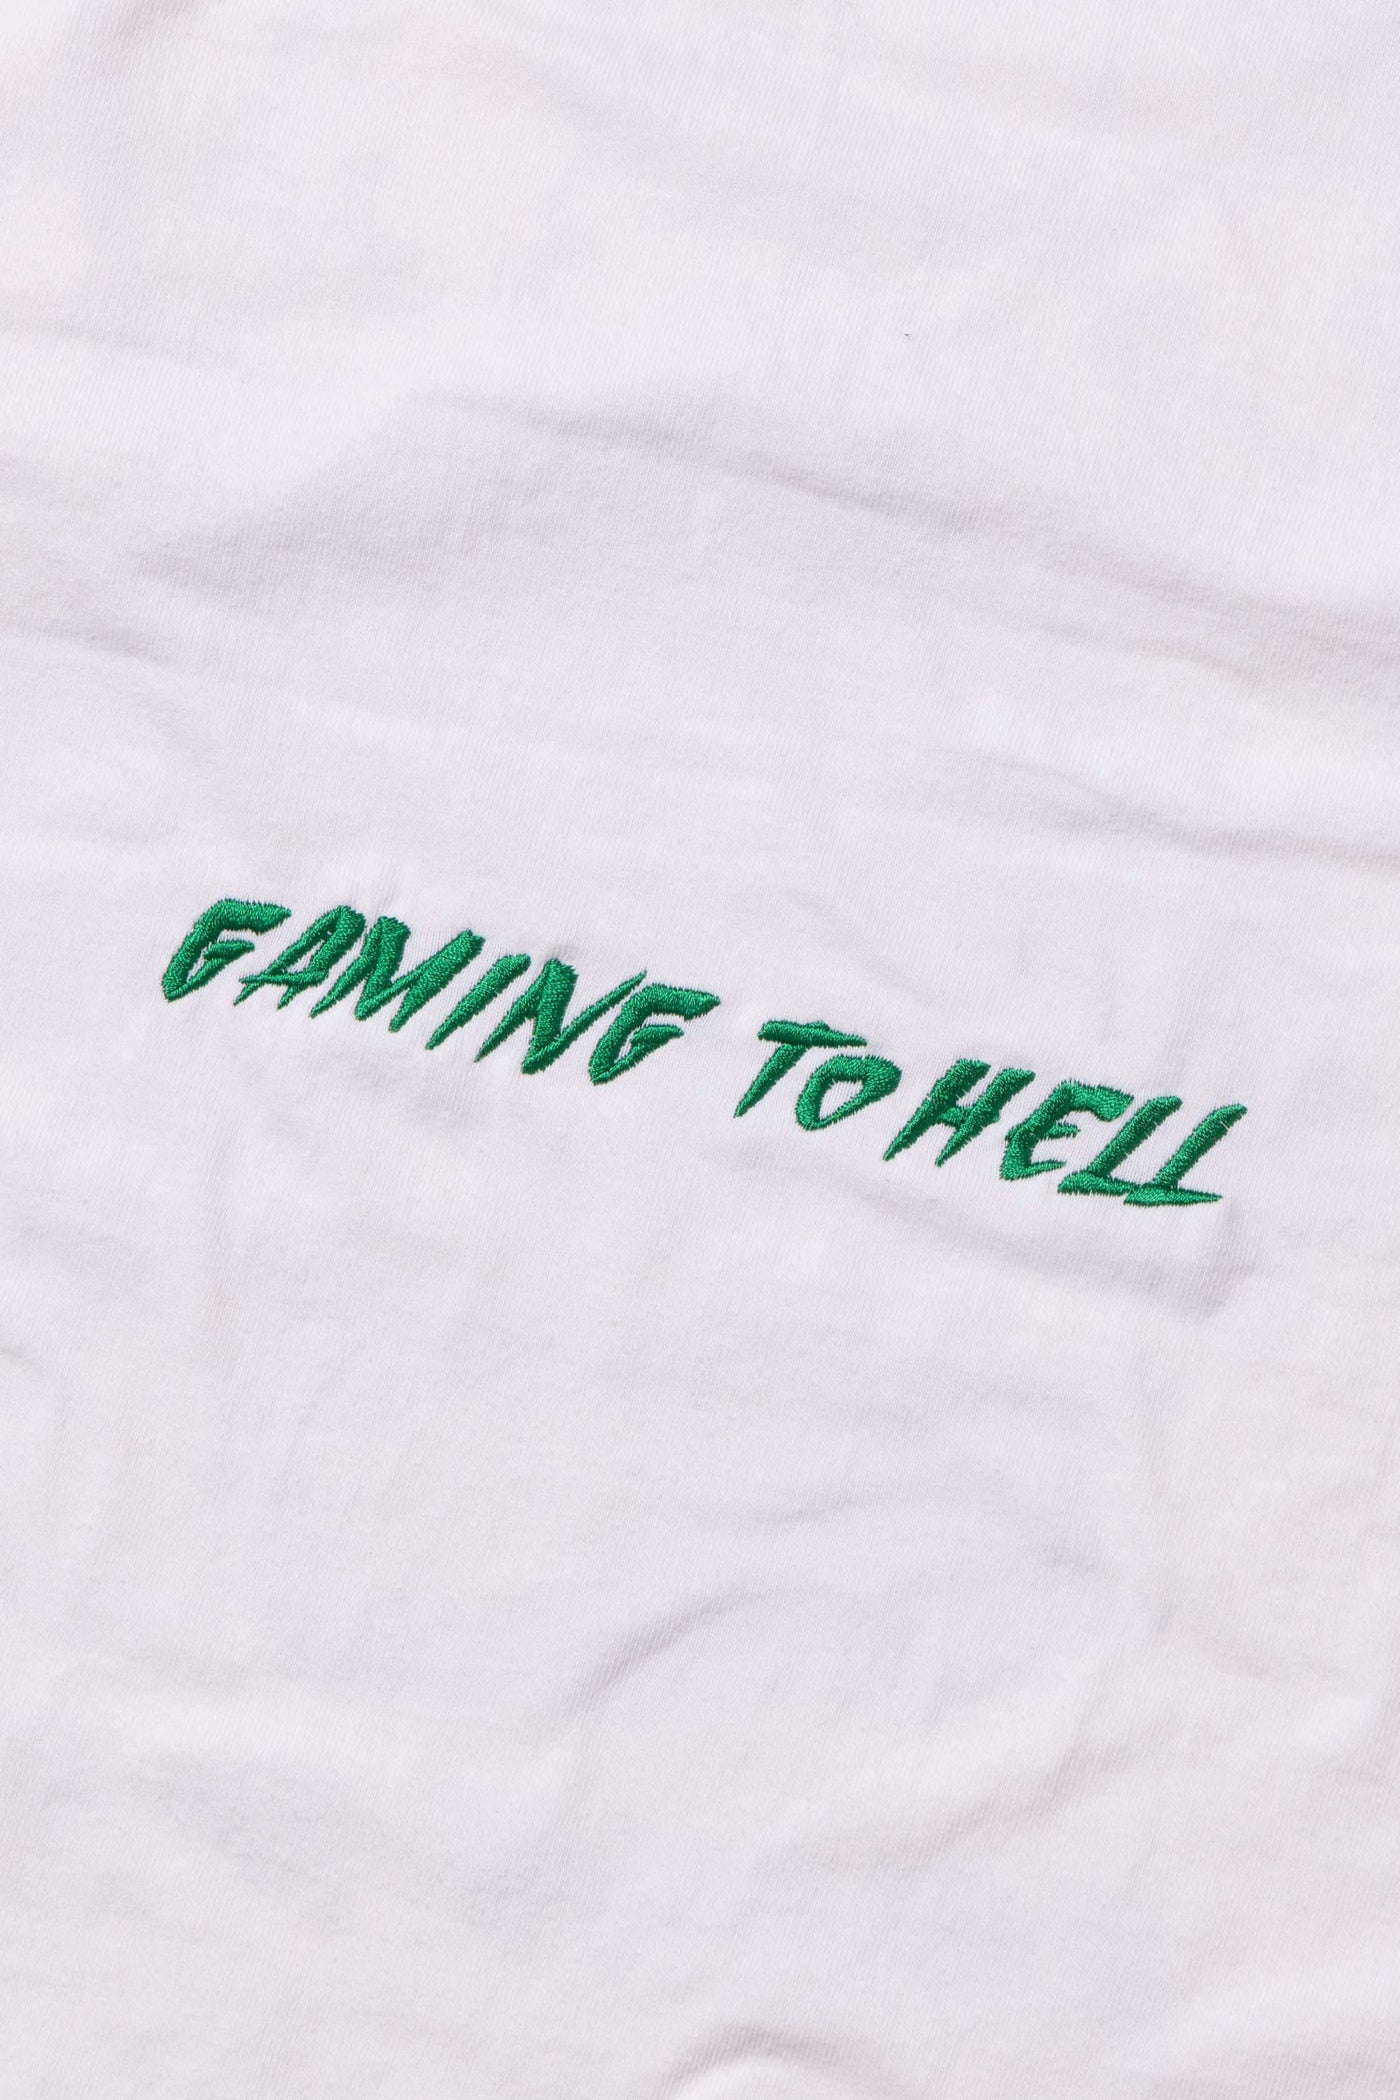 GAMING TO HELL TEE / OFF WHITE